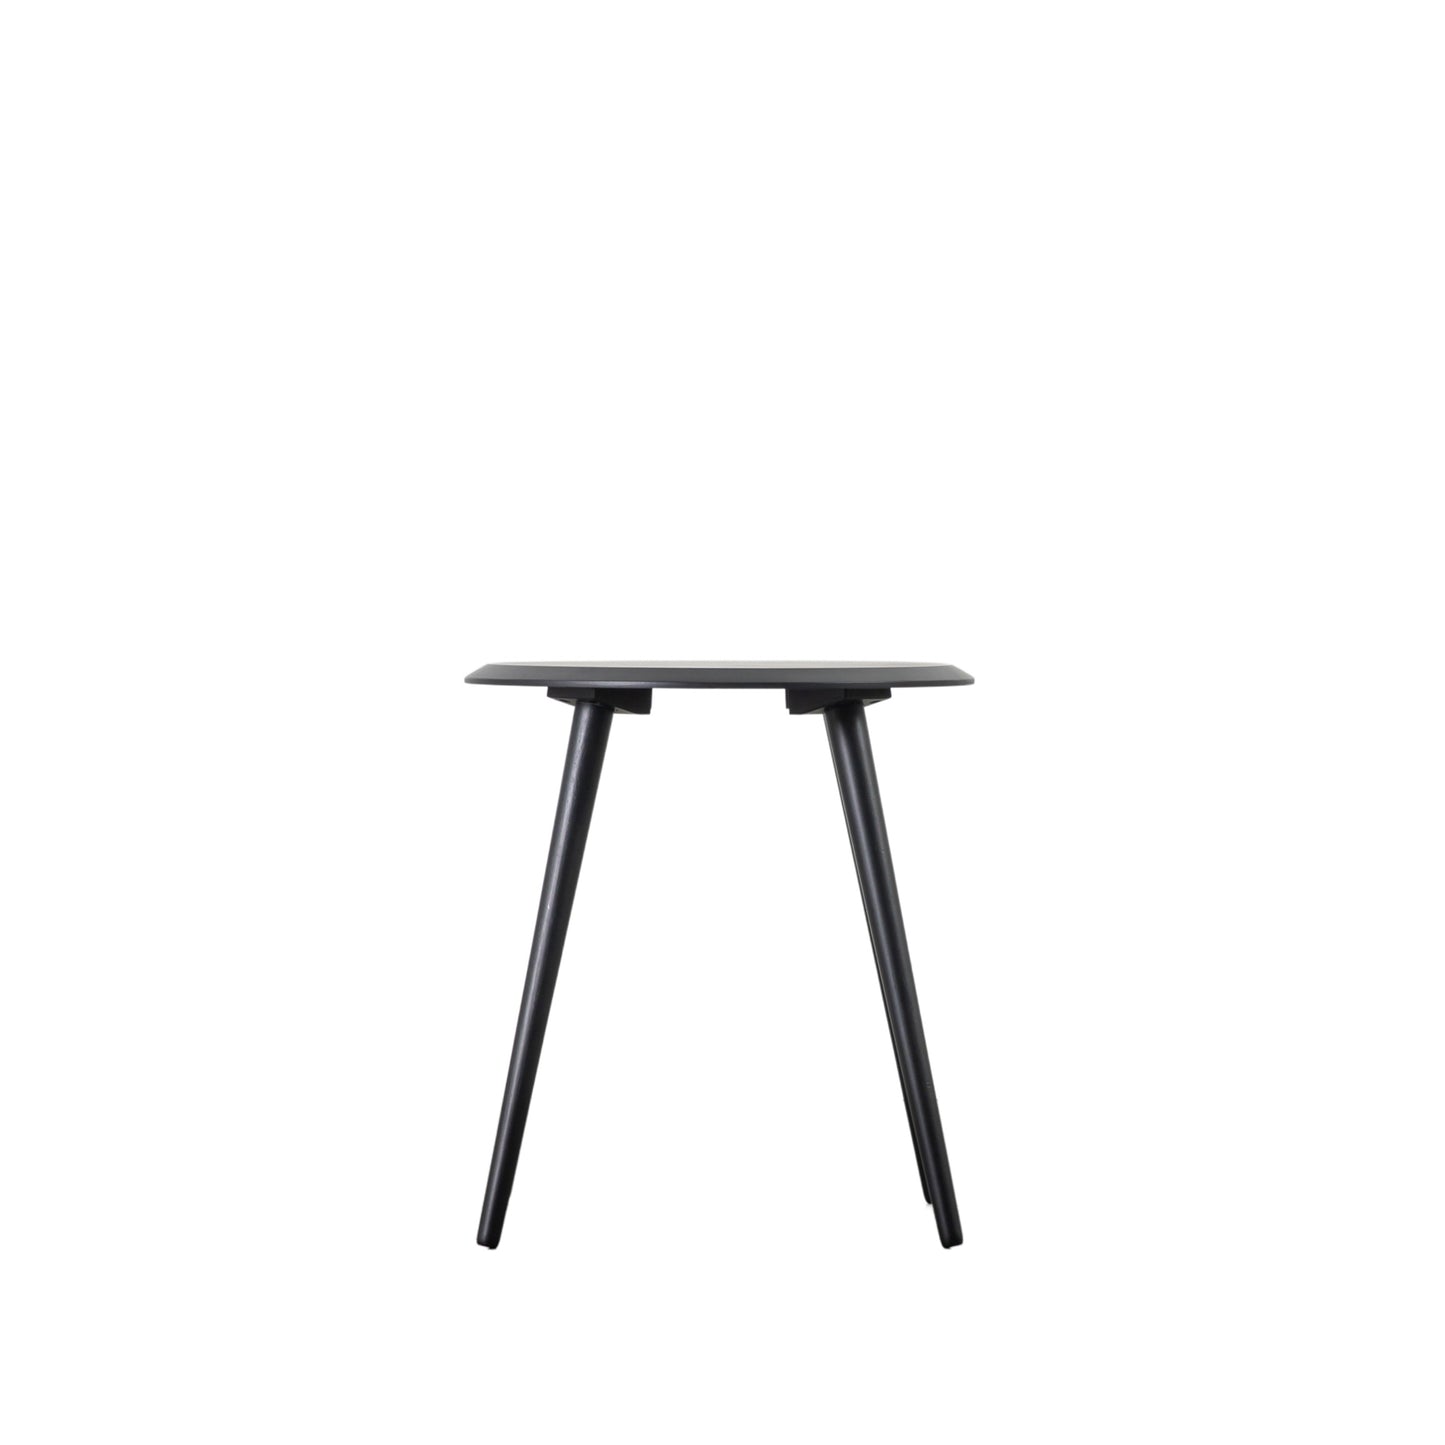 A black Maddox Side Table, perfect for interior decor and home furniture, showcased on a white background from Kikiathome.co.uk.